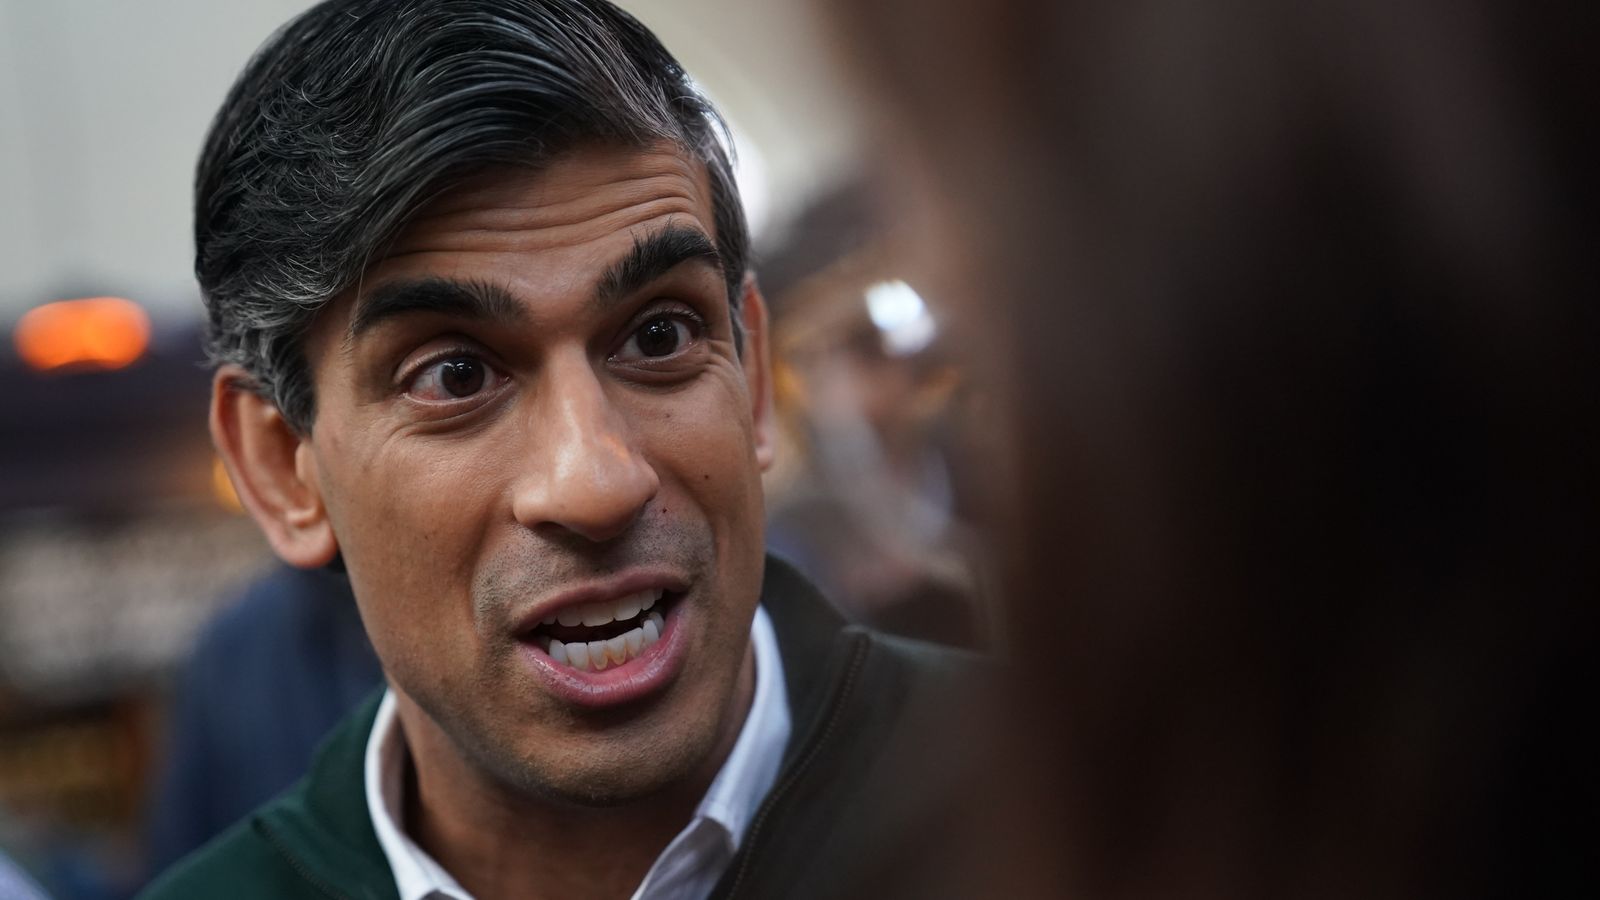 Rishi Sunak doubted Rwanda scheme would stop boat crossings while chancellor, documents suggest